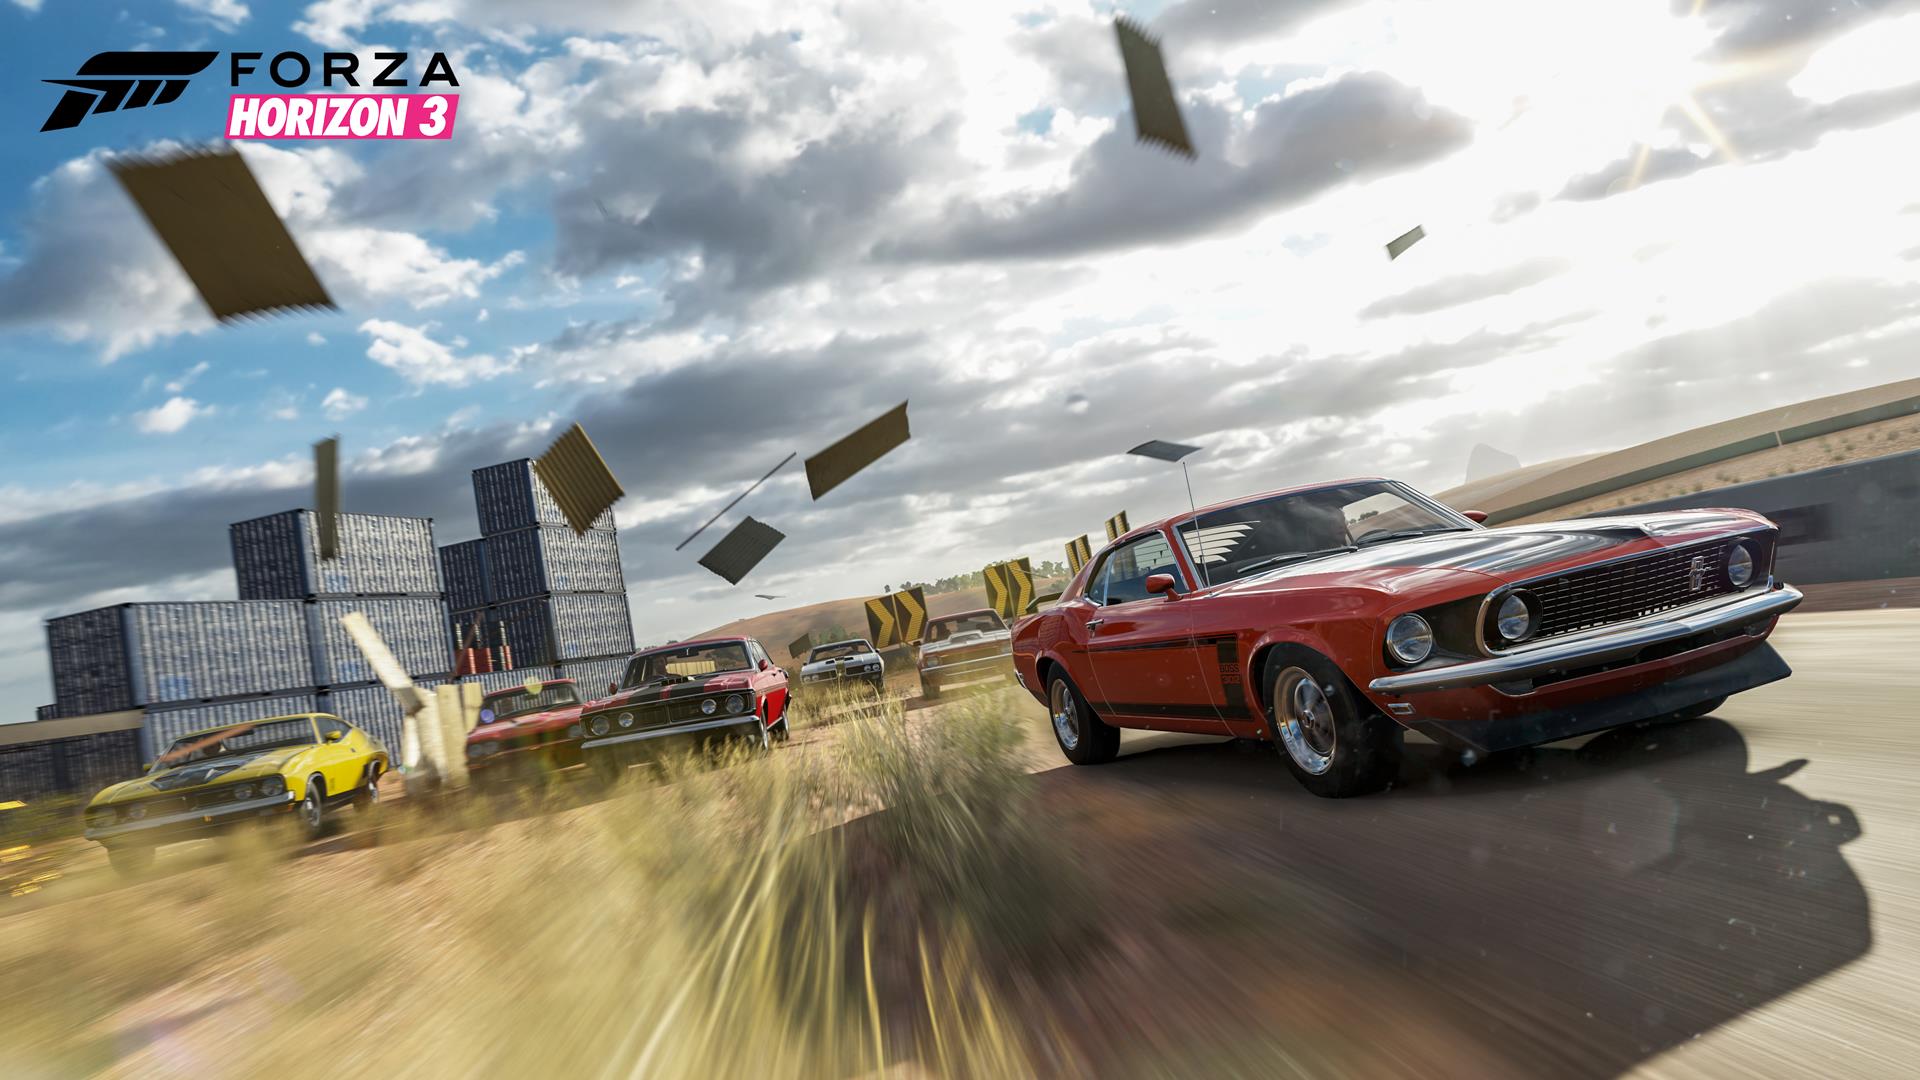 download forza horizon 4 ps4 for free